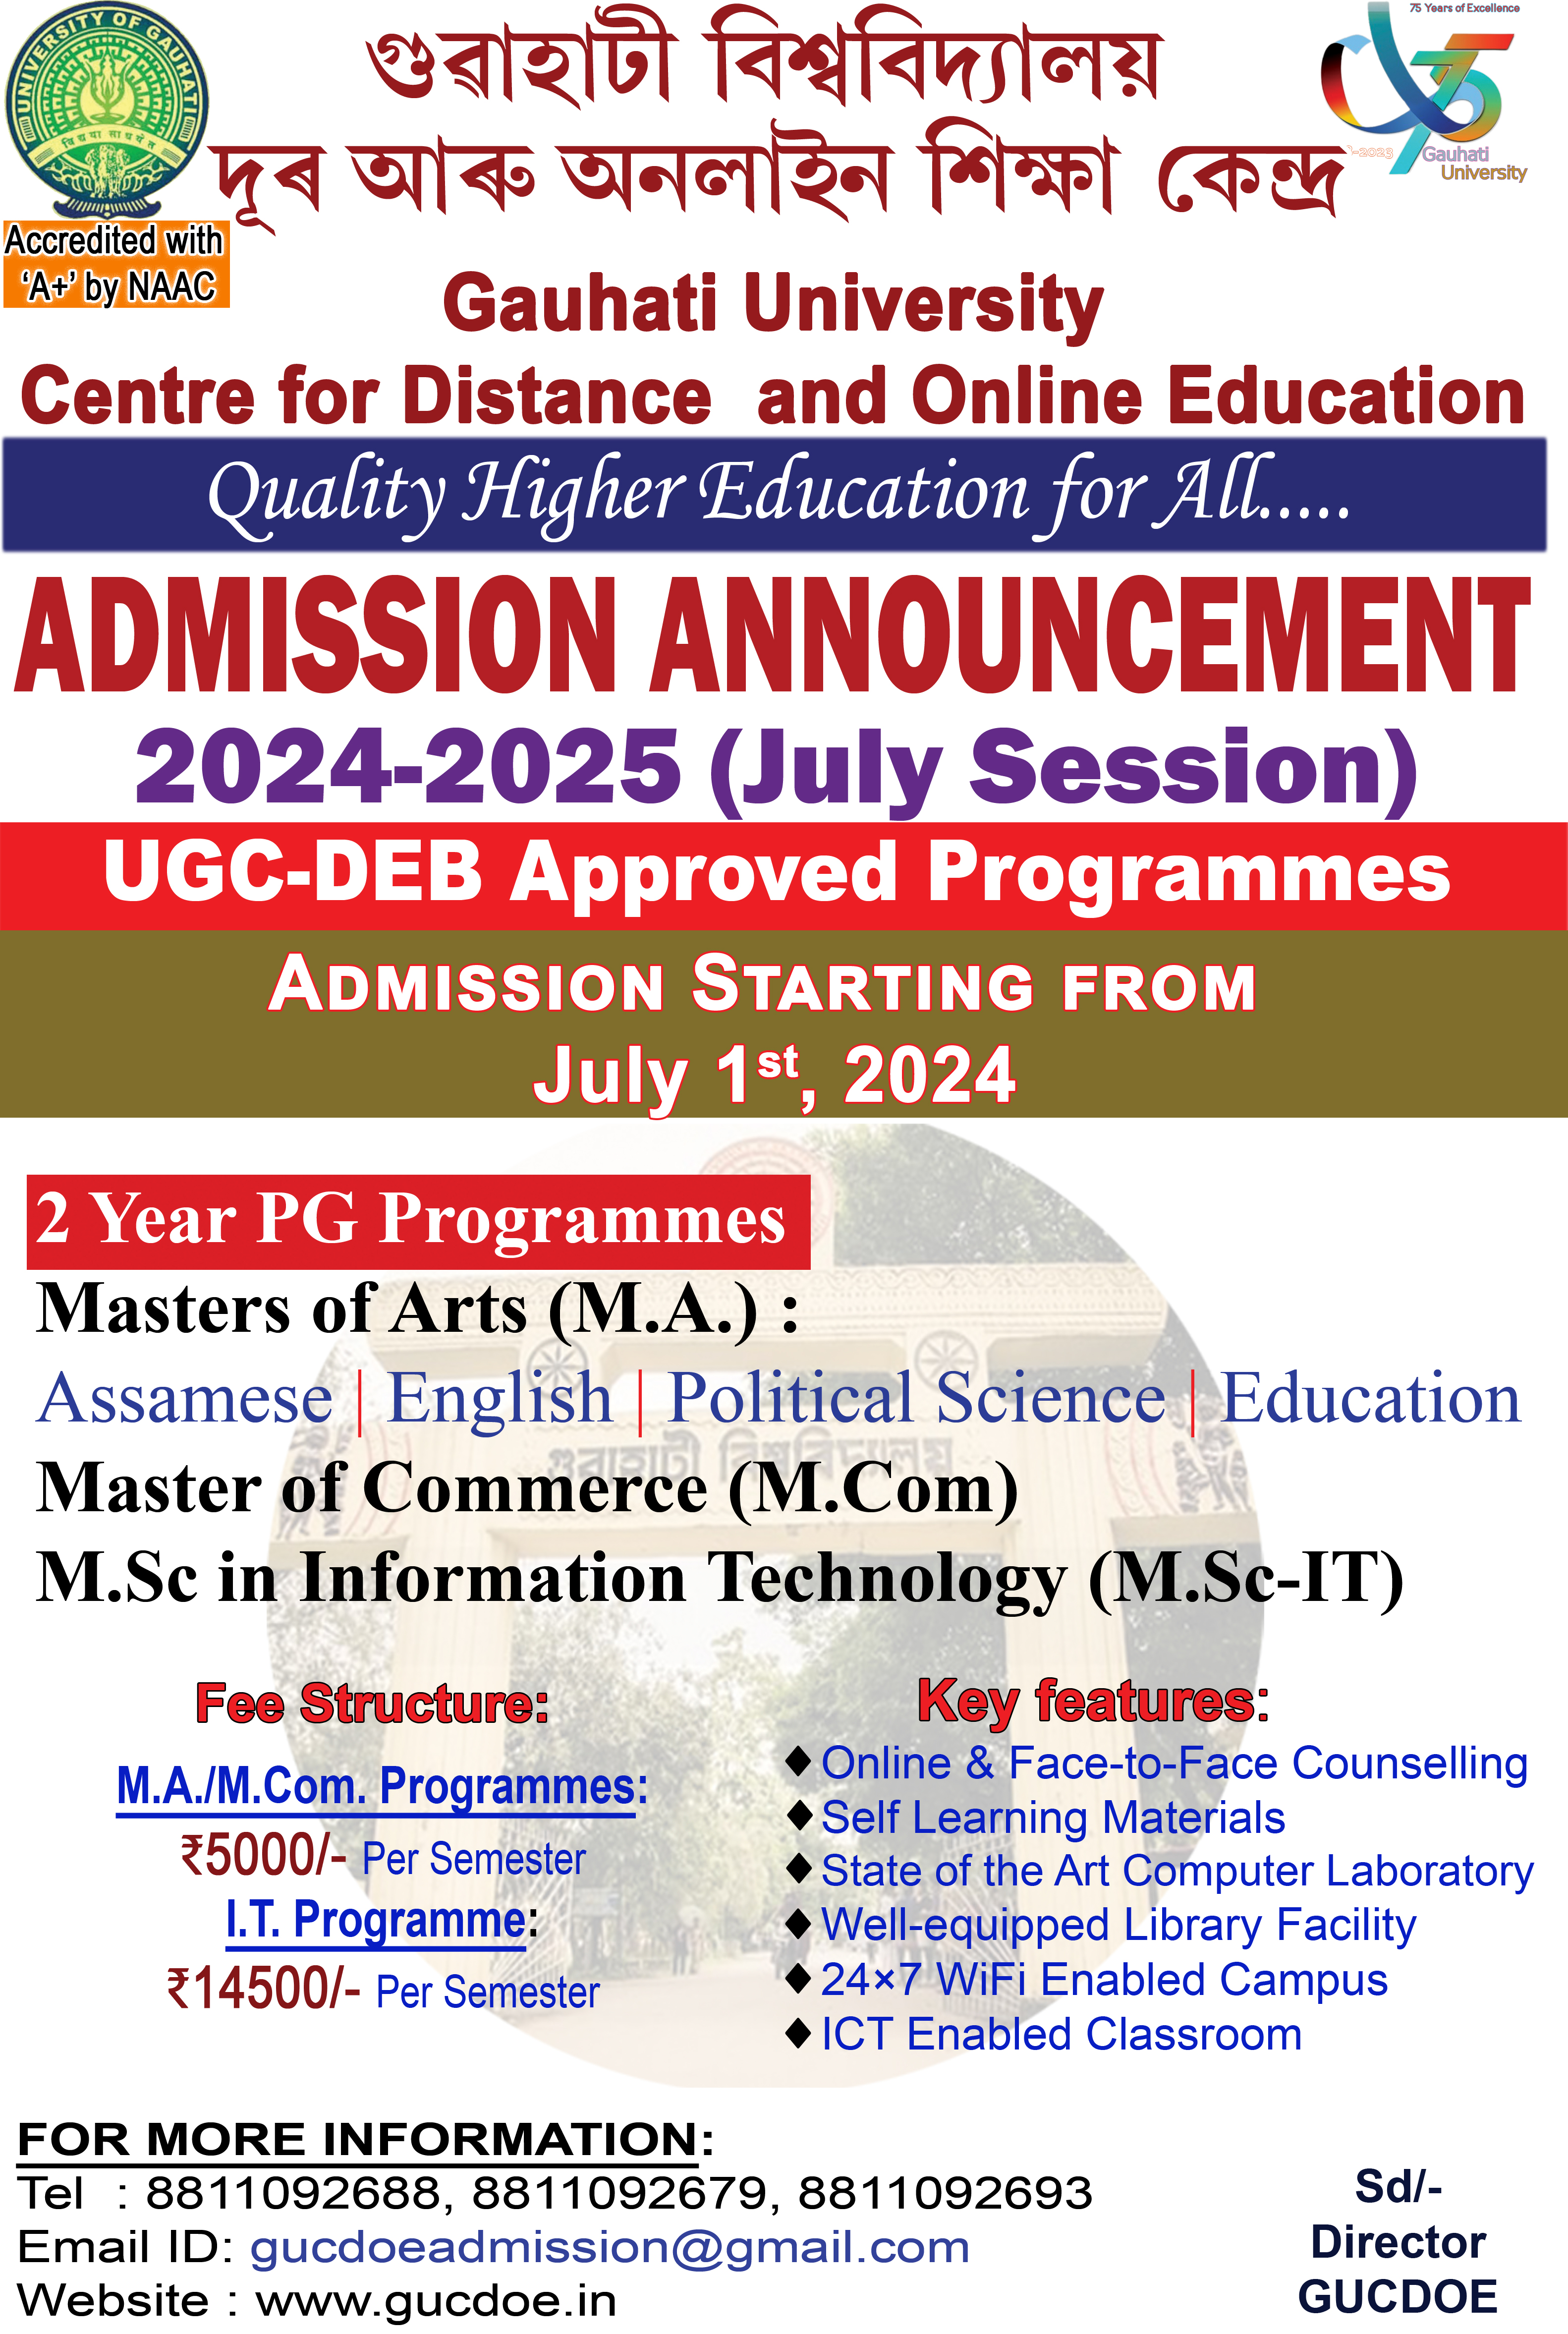 Admission Going ON